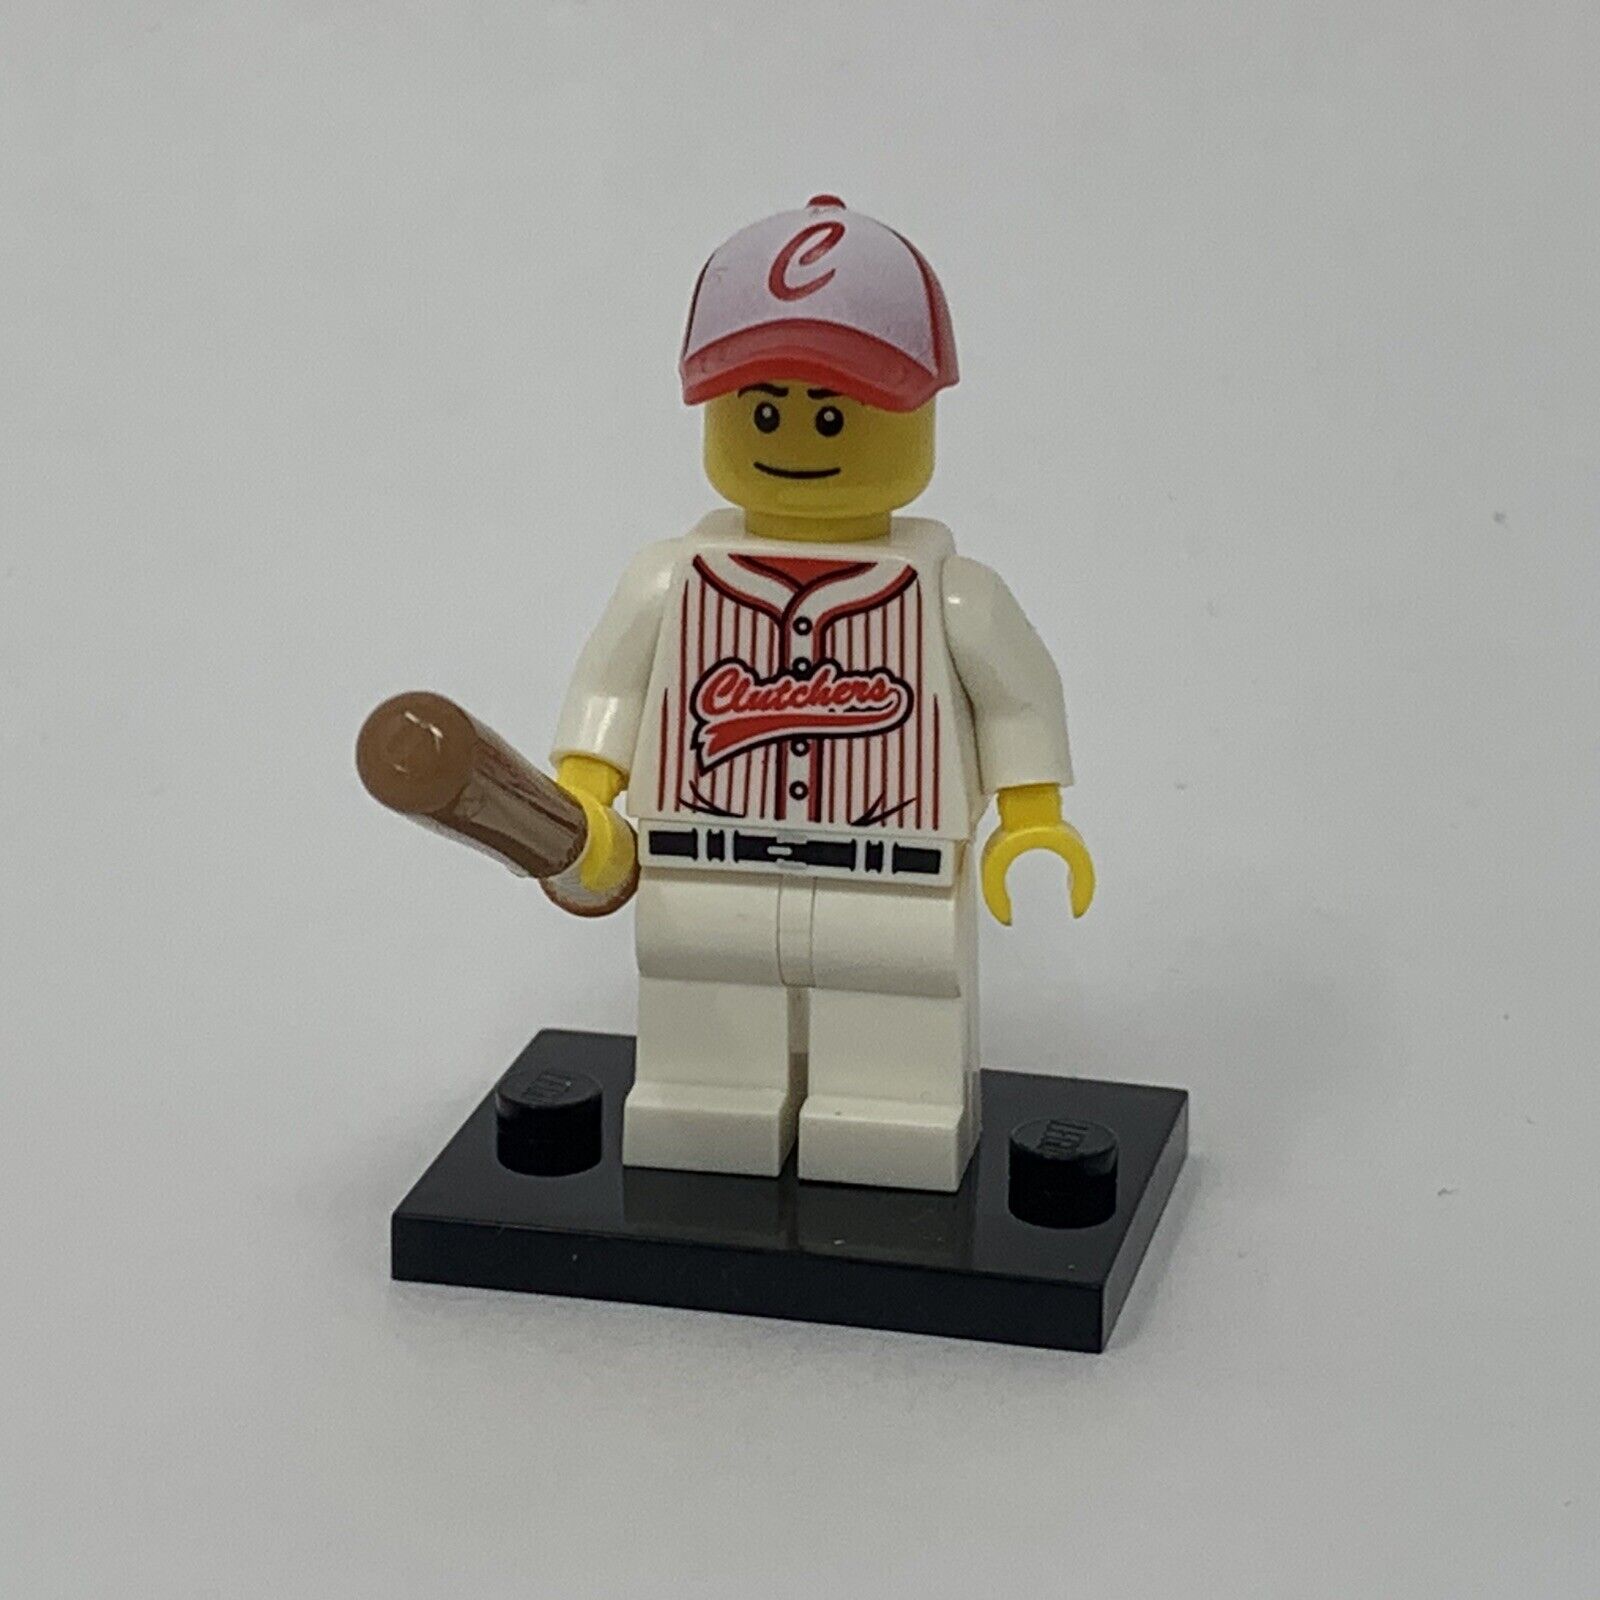 Lego Baseball Player Minifigure Collectible Series 3 CMF Complete w/ Bat